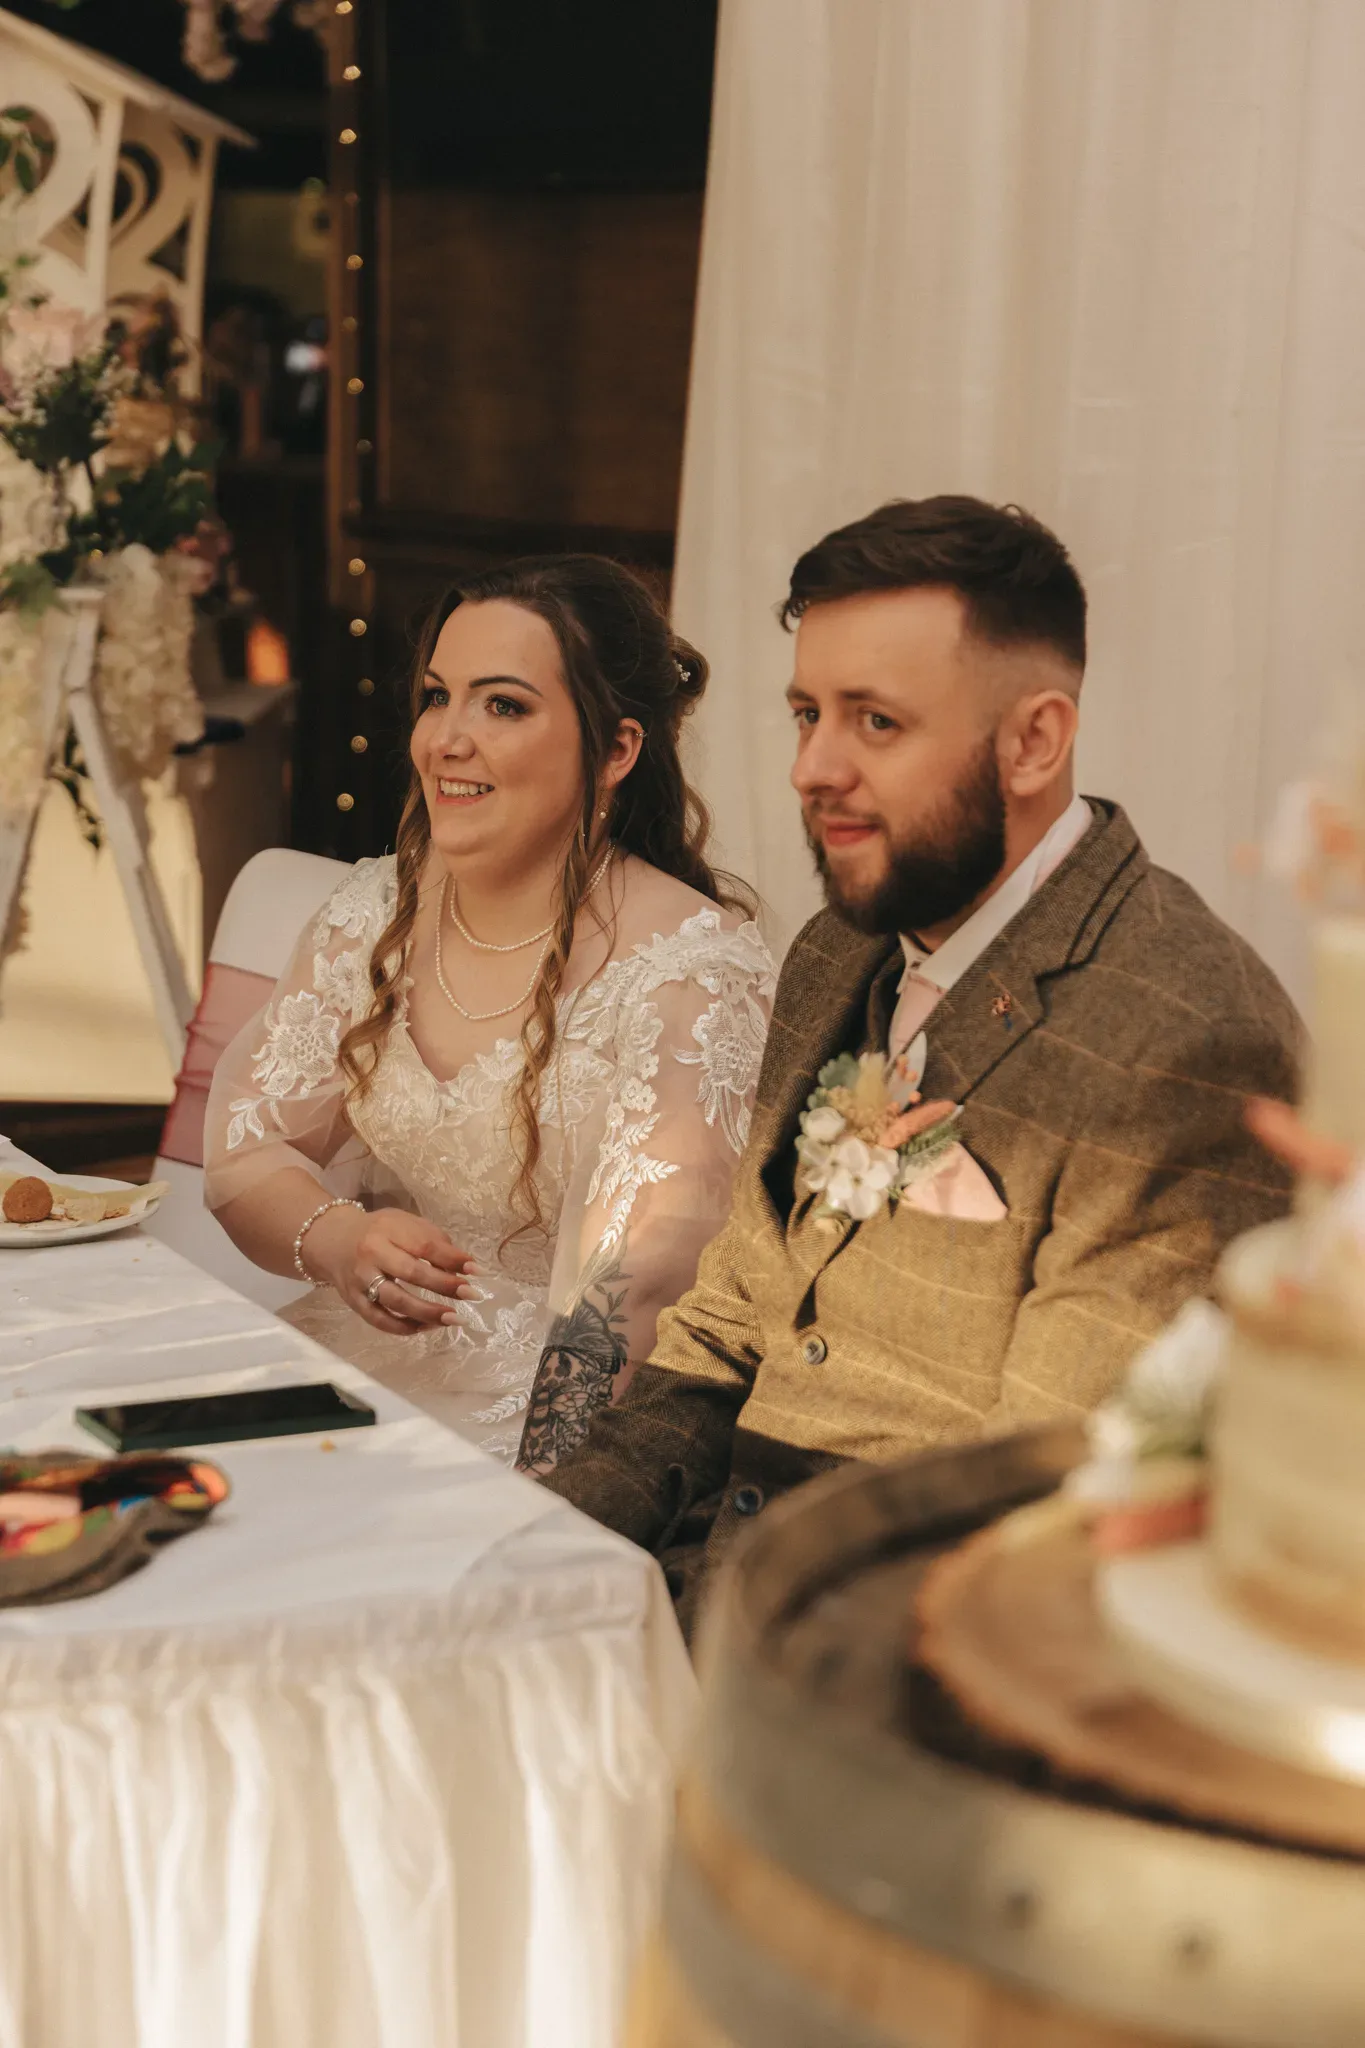 A bride and groom sit at a decorated wedding reception table, smiling while paying attention to a speech. the bride wears a white lace dress and the groom sports a tweed suit and flower boutonniere. a cake is visible in the foreground.